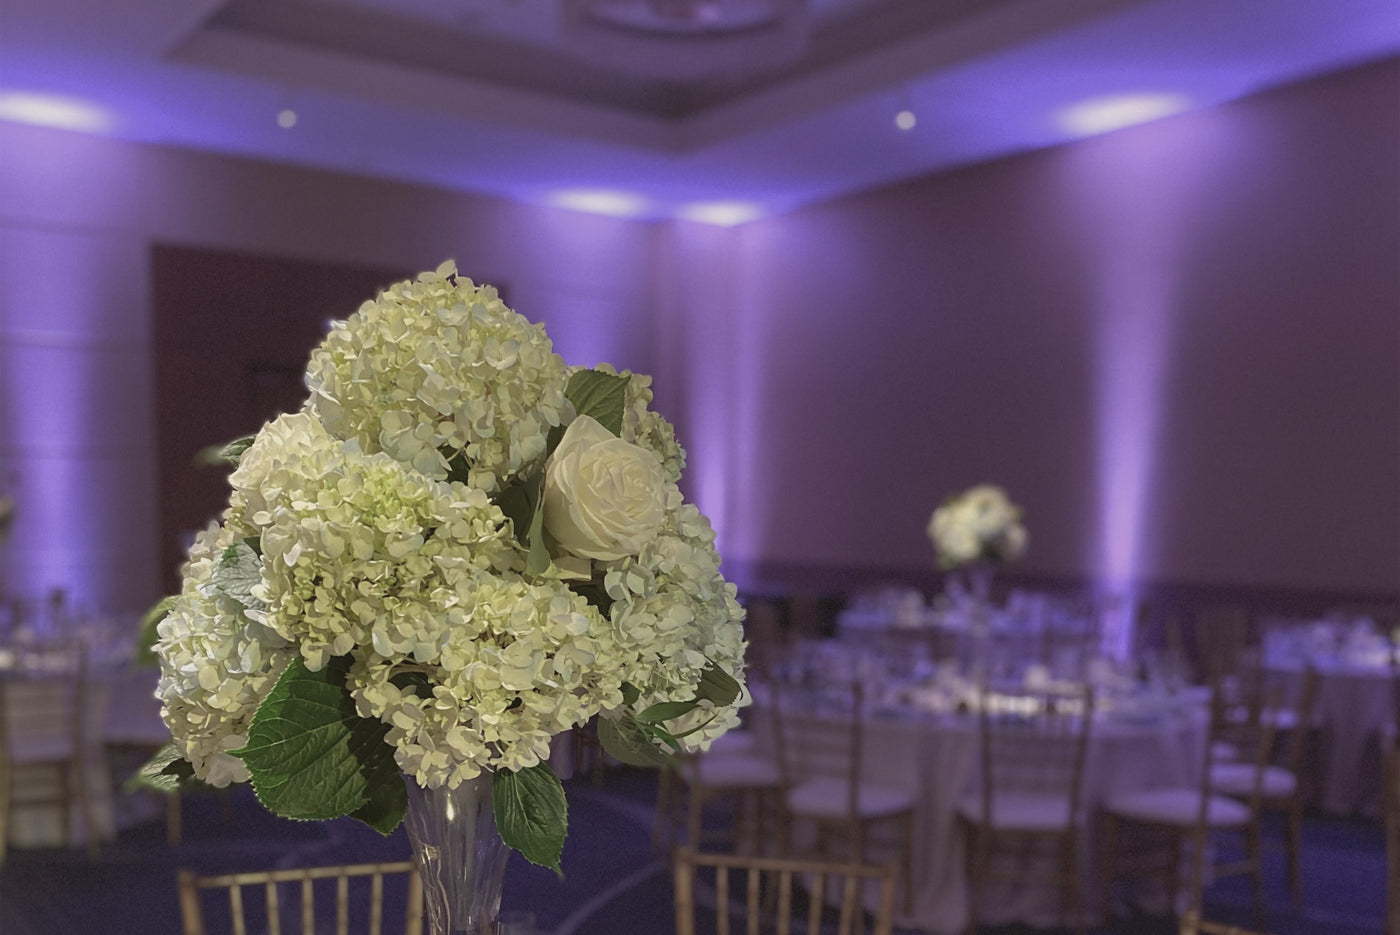 A wedding reception with white flowers and purple uplighting to enhance the wedding theme.